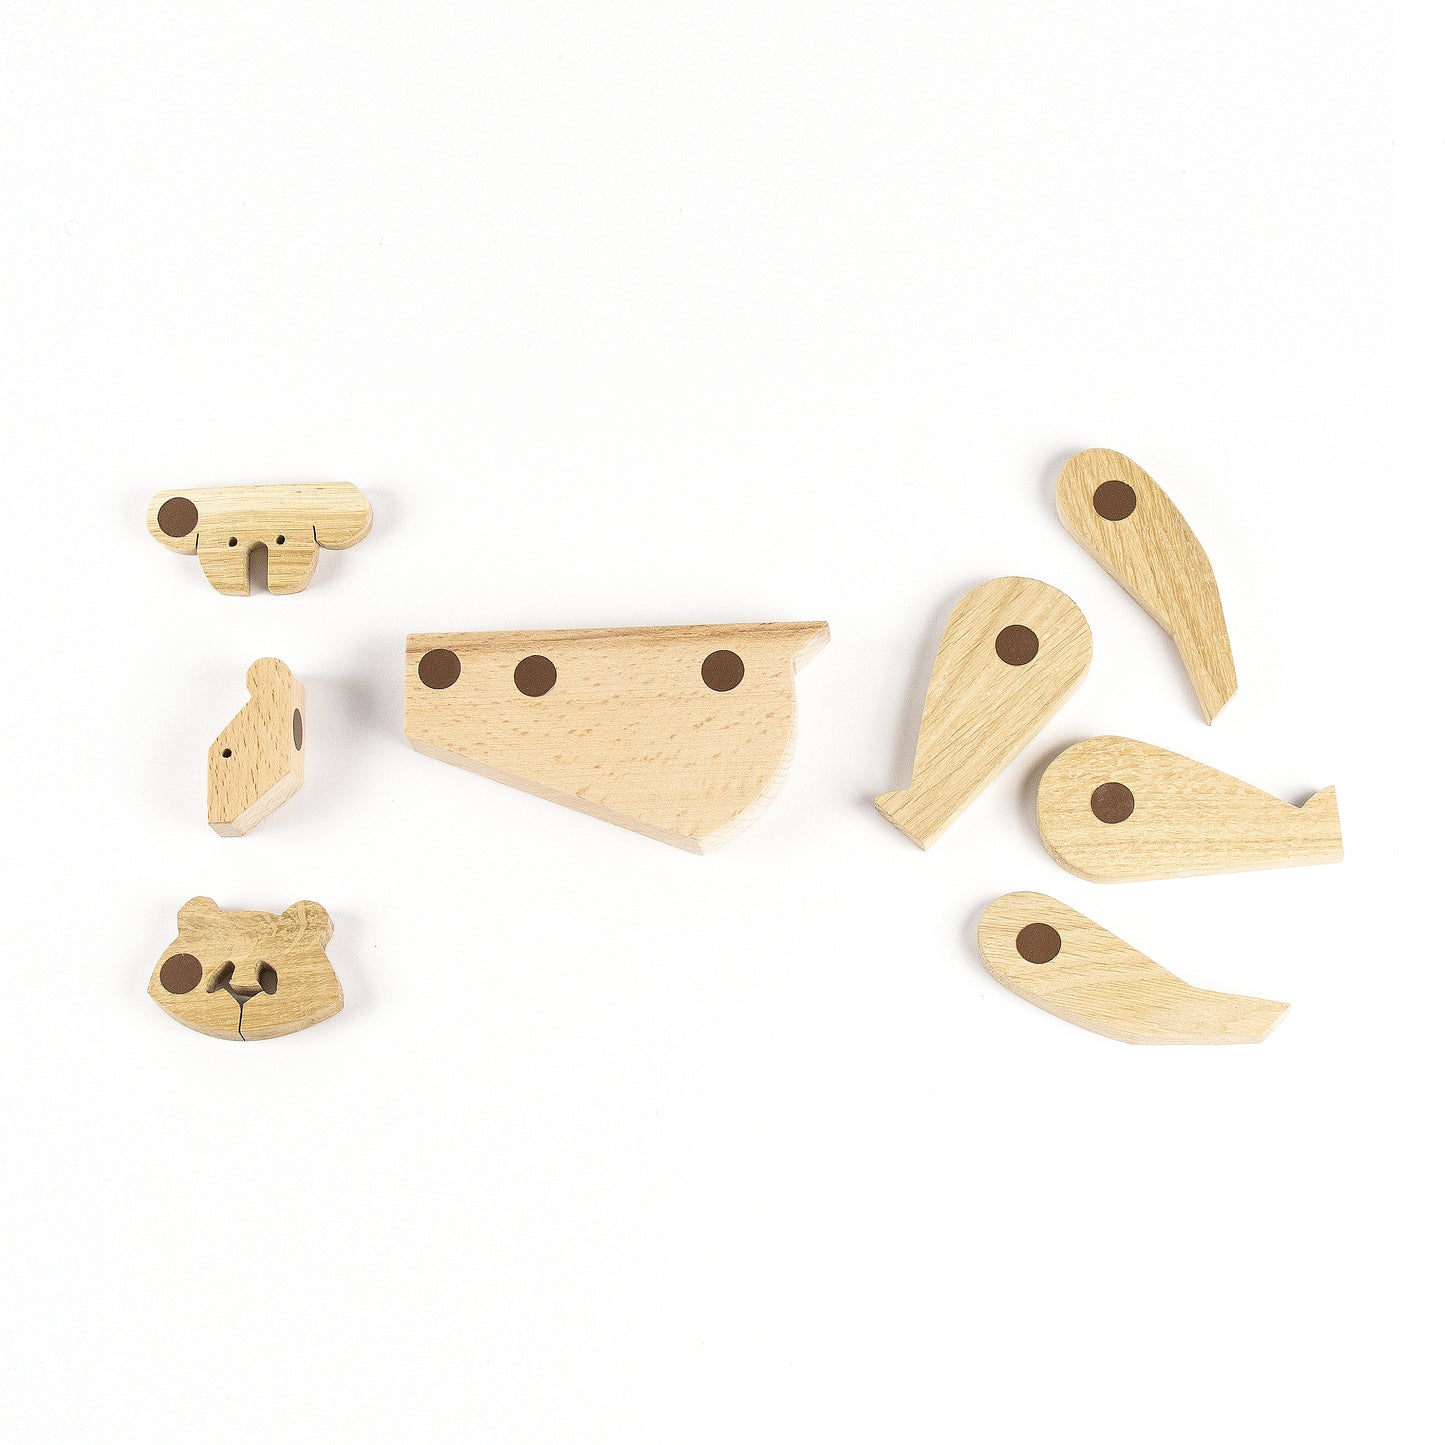 pieces of magnets to assemble a wooden toy panda, koala and bear